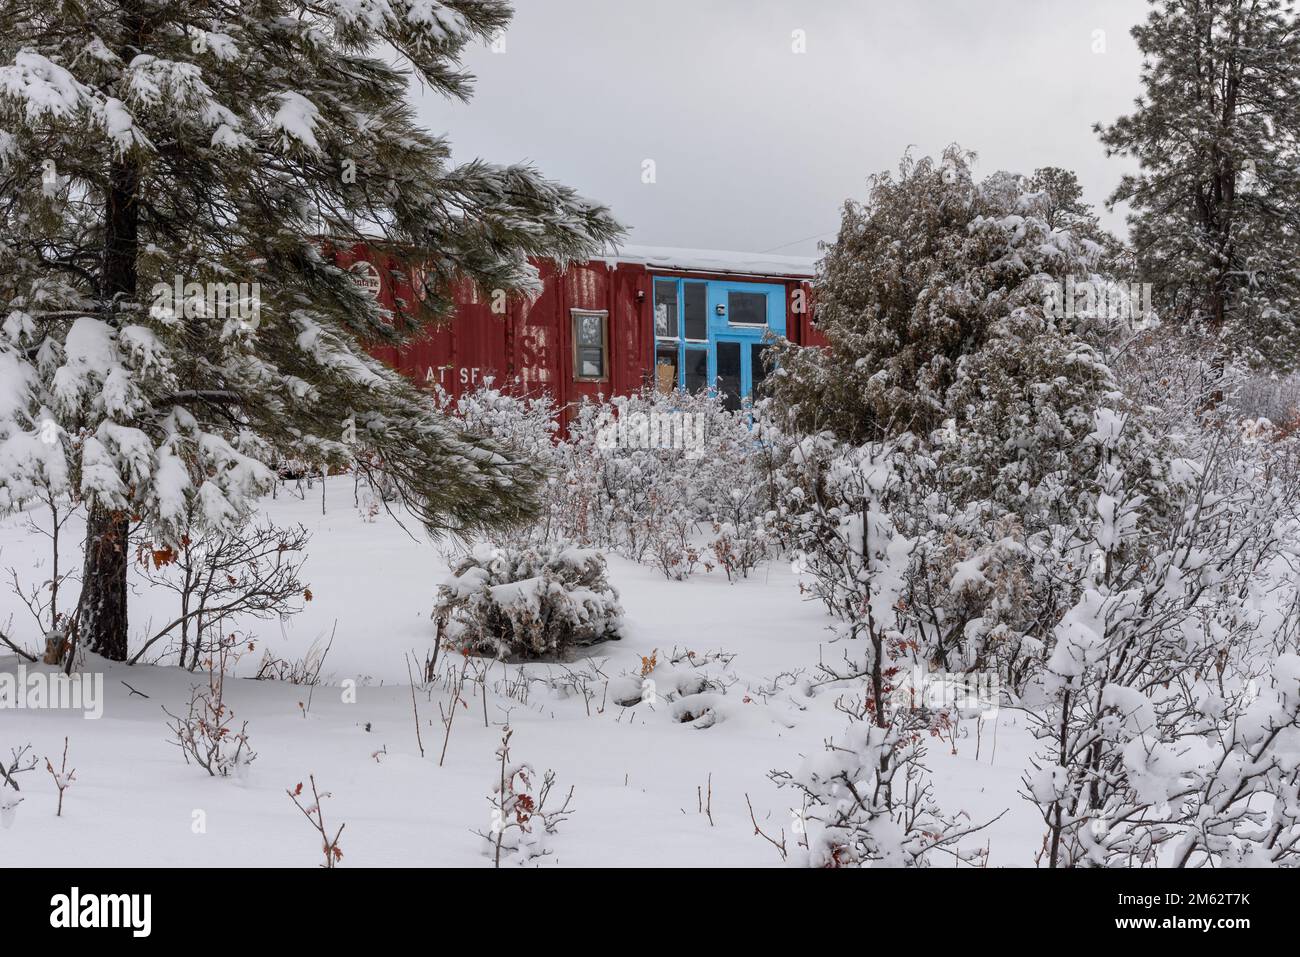 A bright, dark-red train boxcar converted into a living space with large windows and doors framed in turquoise in a snowy, wooded area in New Mexico. Stock Photo